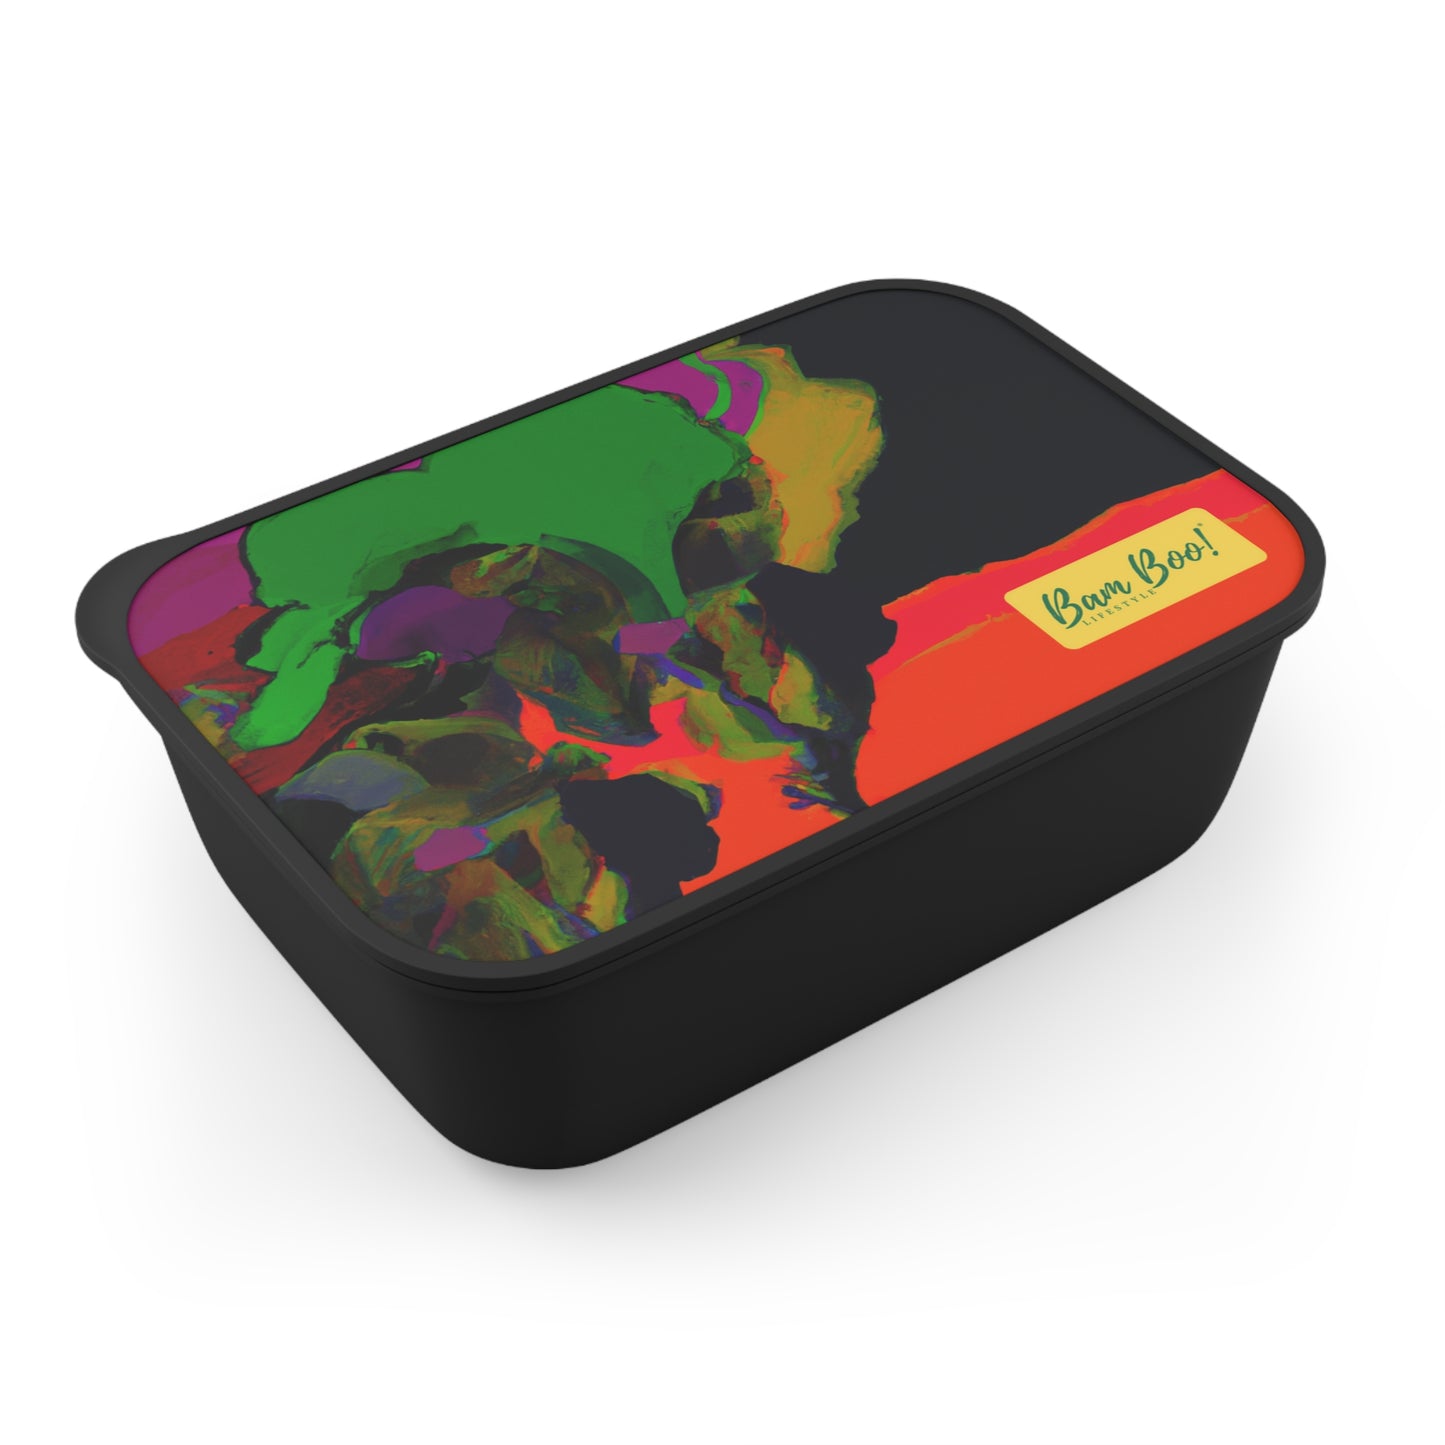 "Multilayered Palette: A Colorful Exploration of Textural Contrast" - Bam Boo! Lifestyle Eco-friendly PLA Bento Box with Band and Utensils